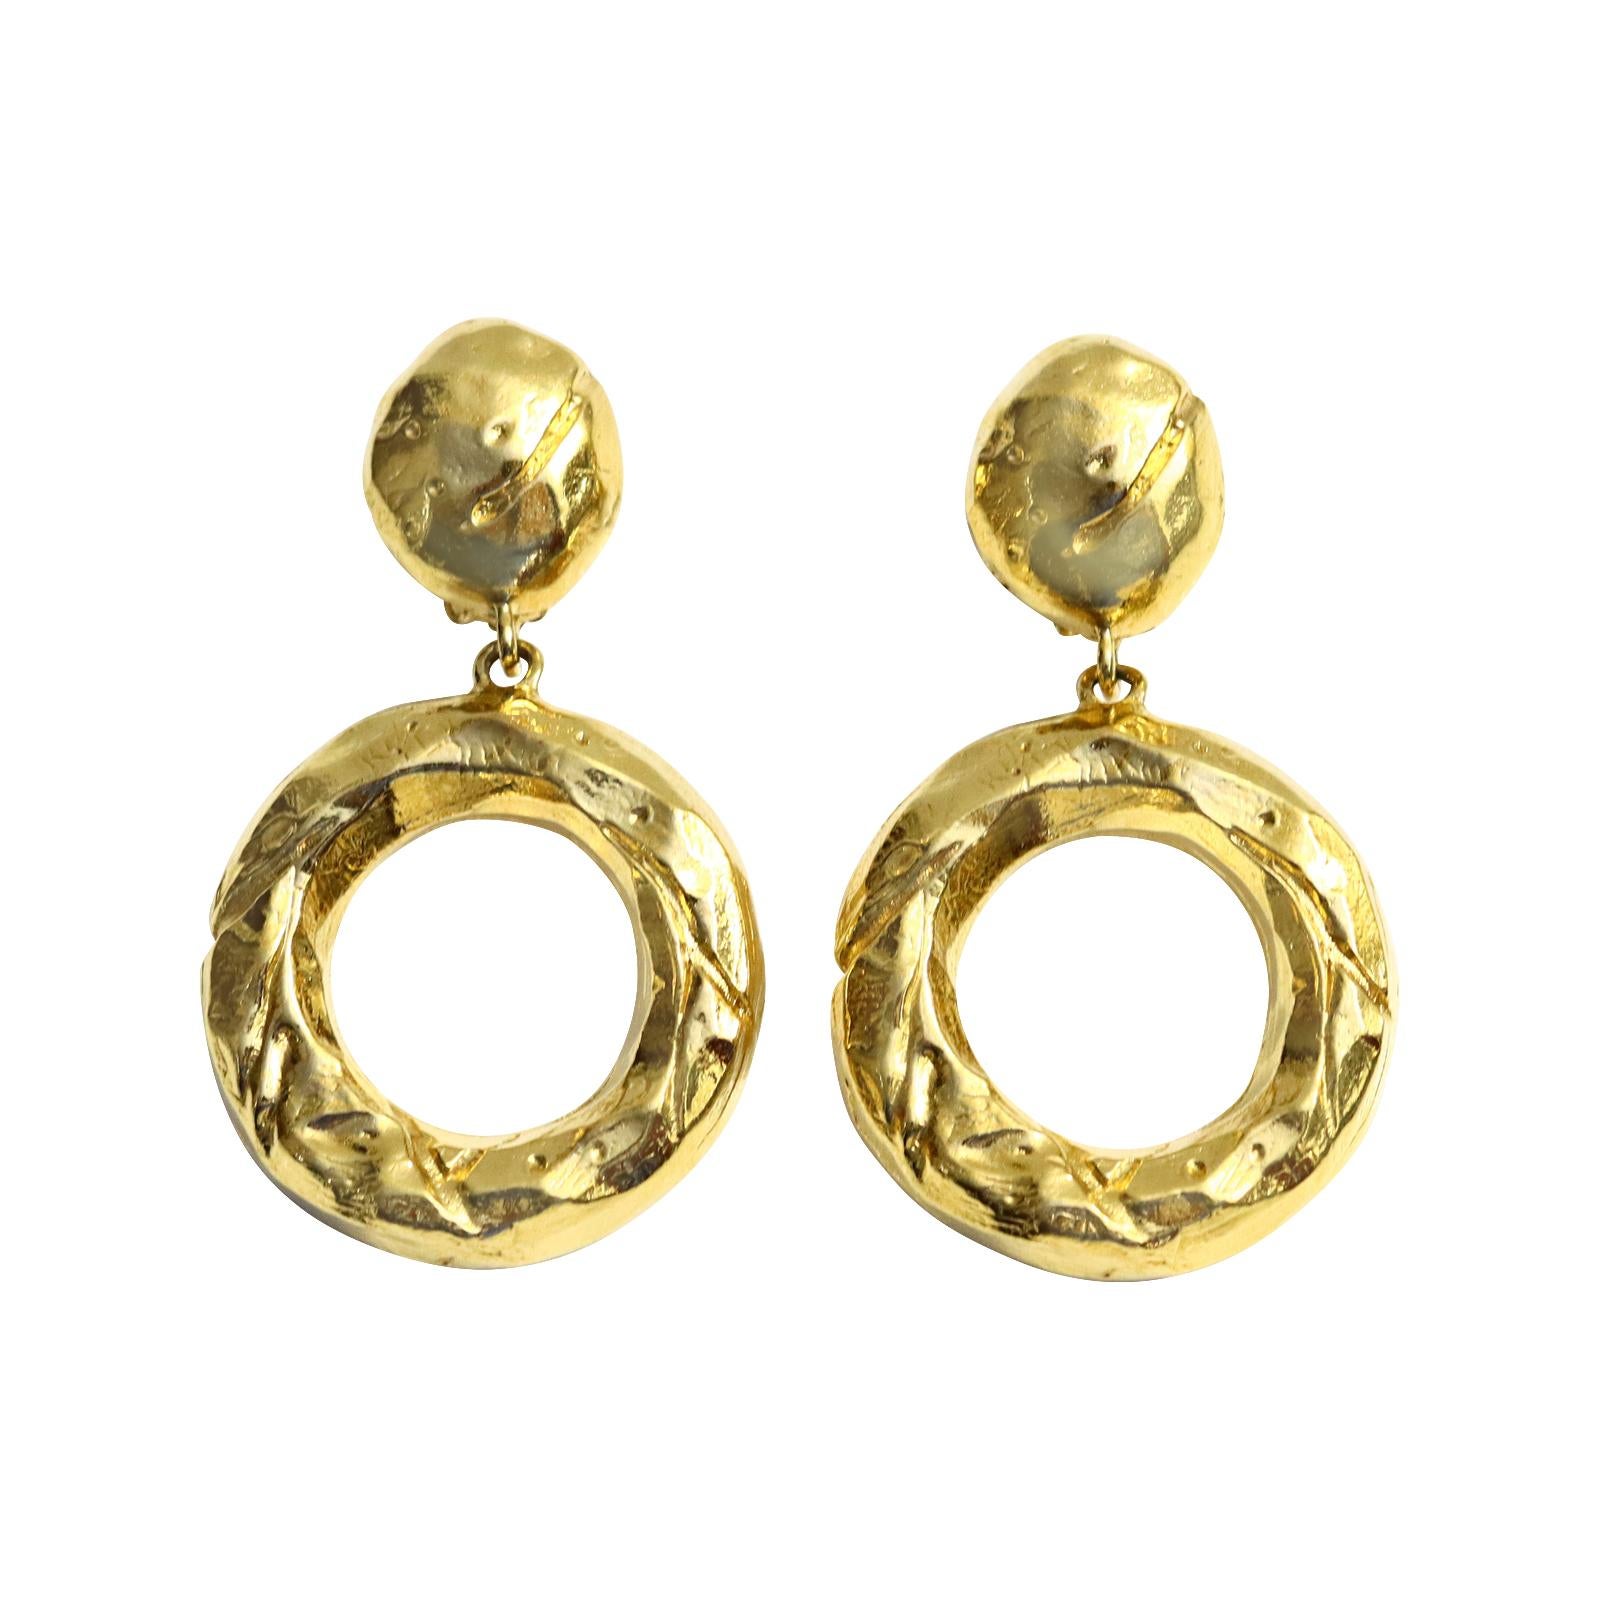 Artist Vintage Givenchy Gold Tone Textured  Dangling Hoop Earrings Circa 1990s